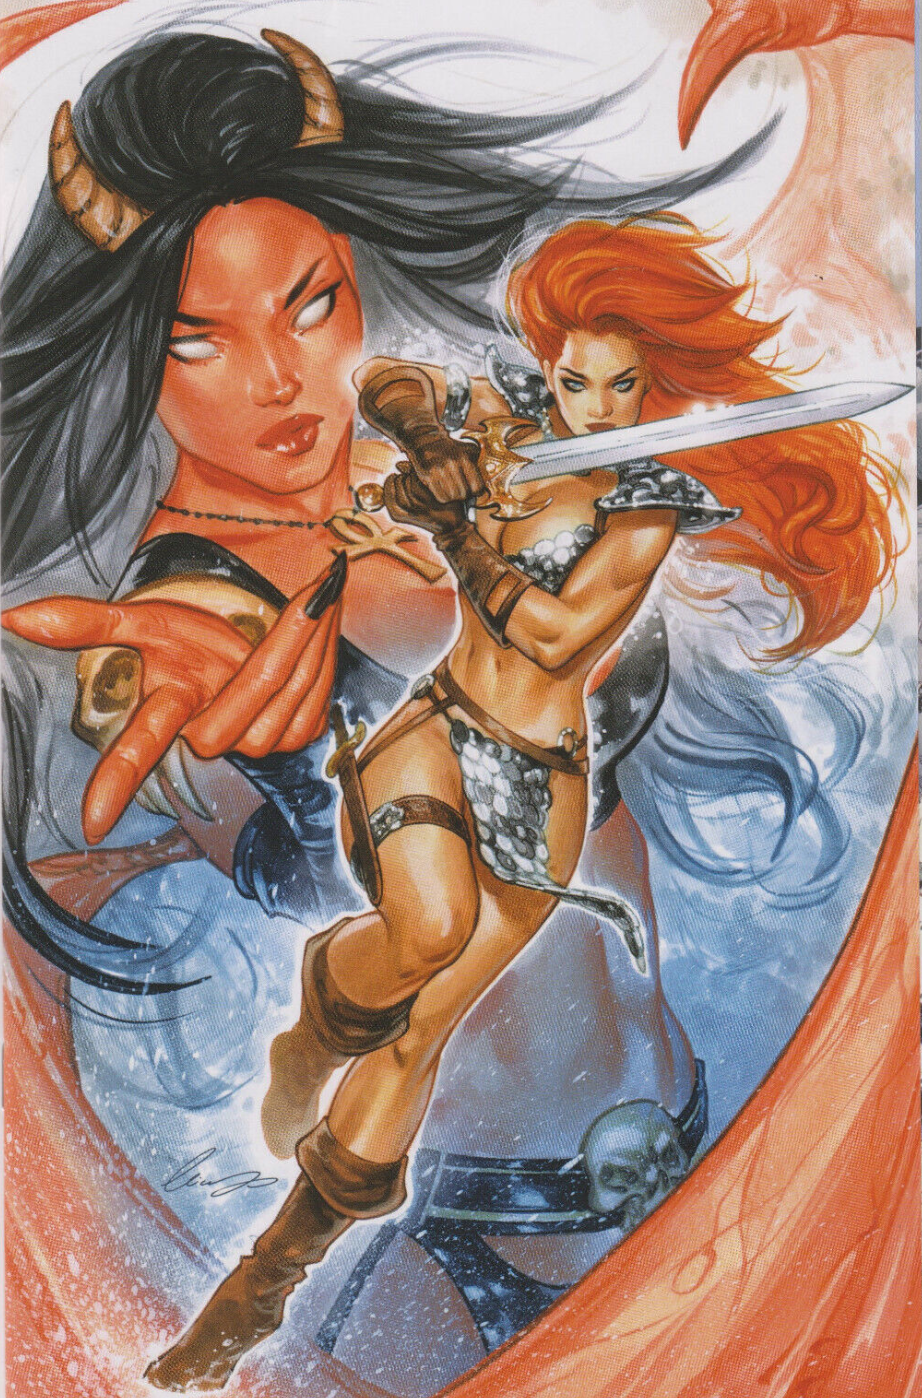 RED SONJA AGE OF CHAOS #6 FOC CHATZOUDIS 1:25 VIRGIN VARIANT 2020 Red Sonja DYNAMITE   